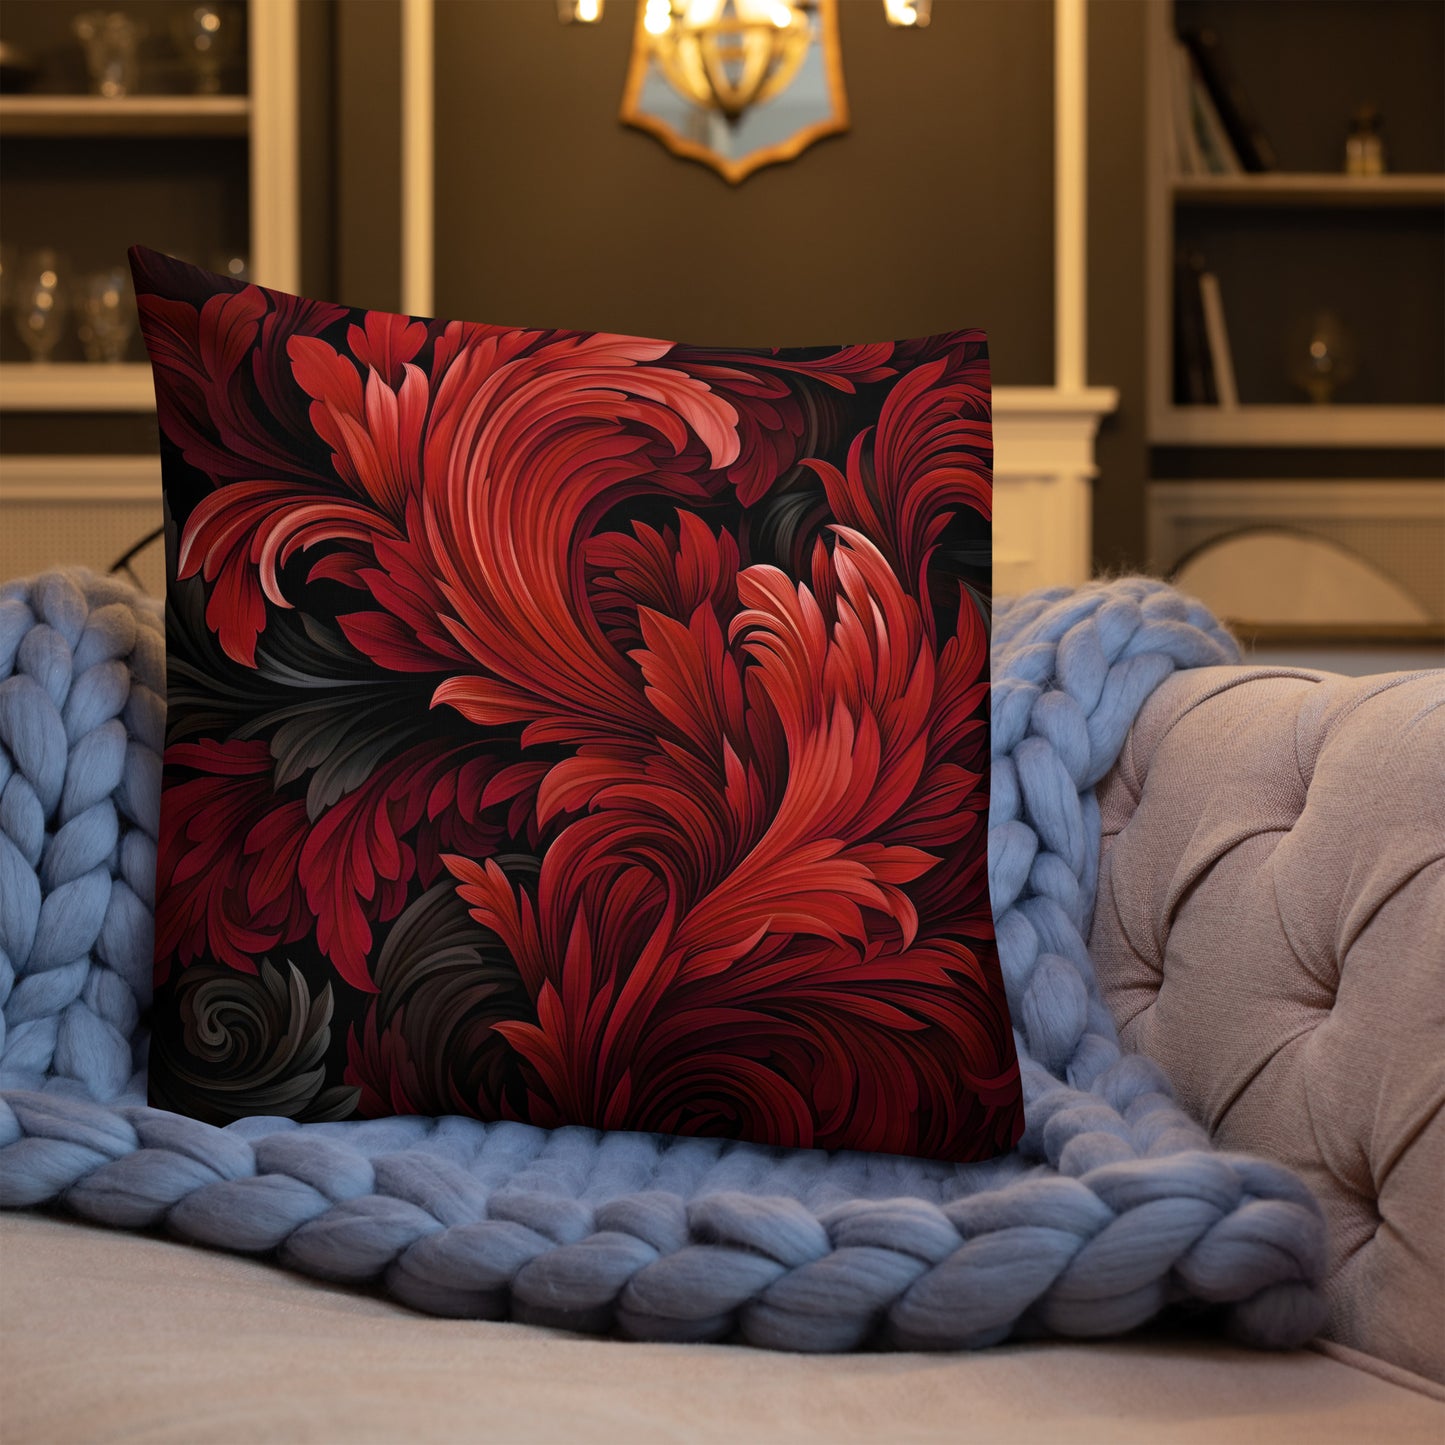 Red and Black Swirling Leaves Premium Pillow